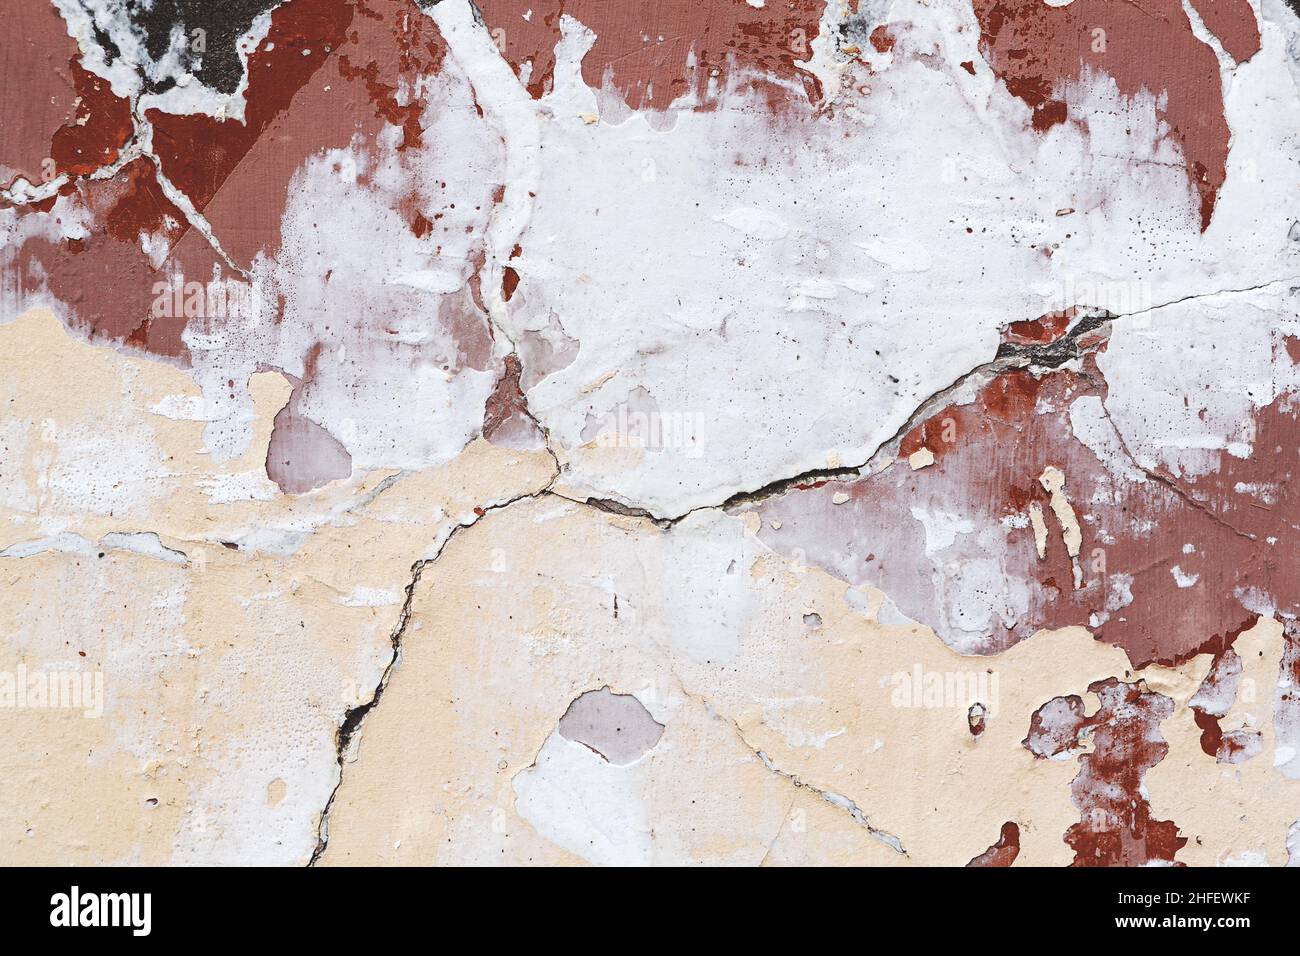 Concrete, weathered, worn, damaged wall paint. Rough, concrete surface with cracks and scratches. Great background or texture. Stock Photo